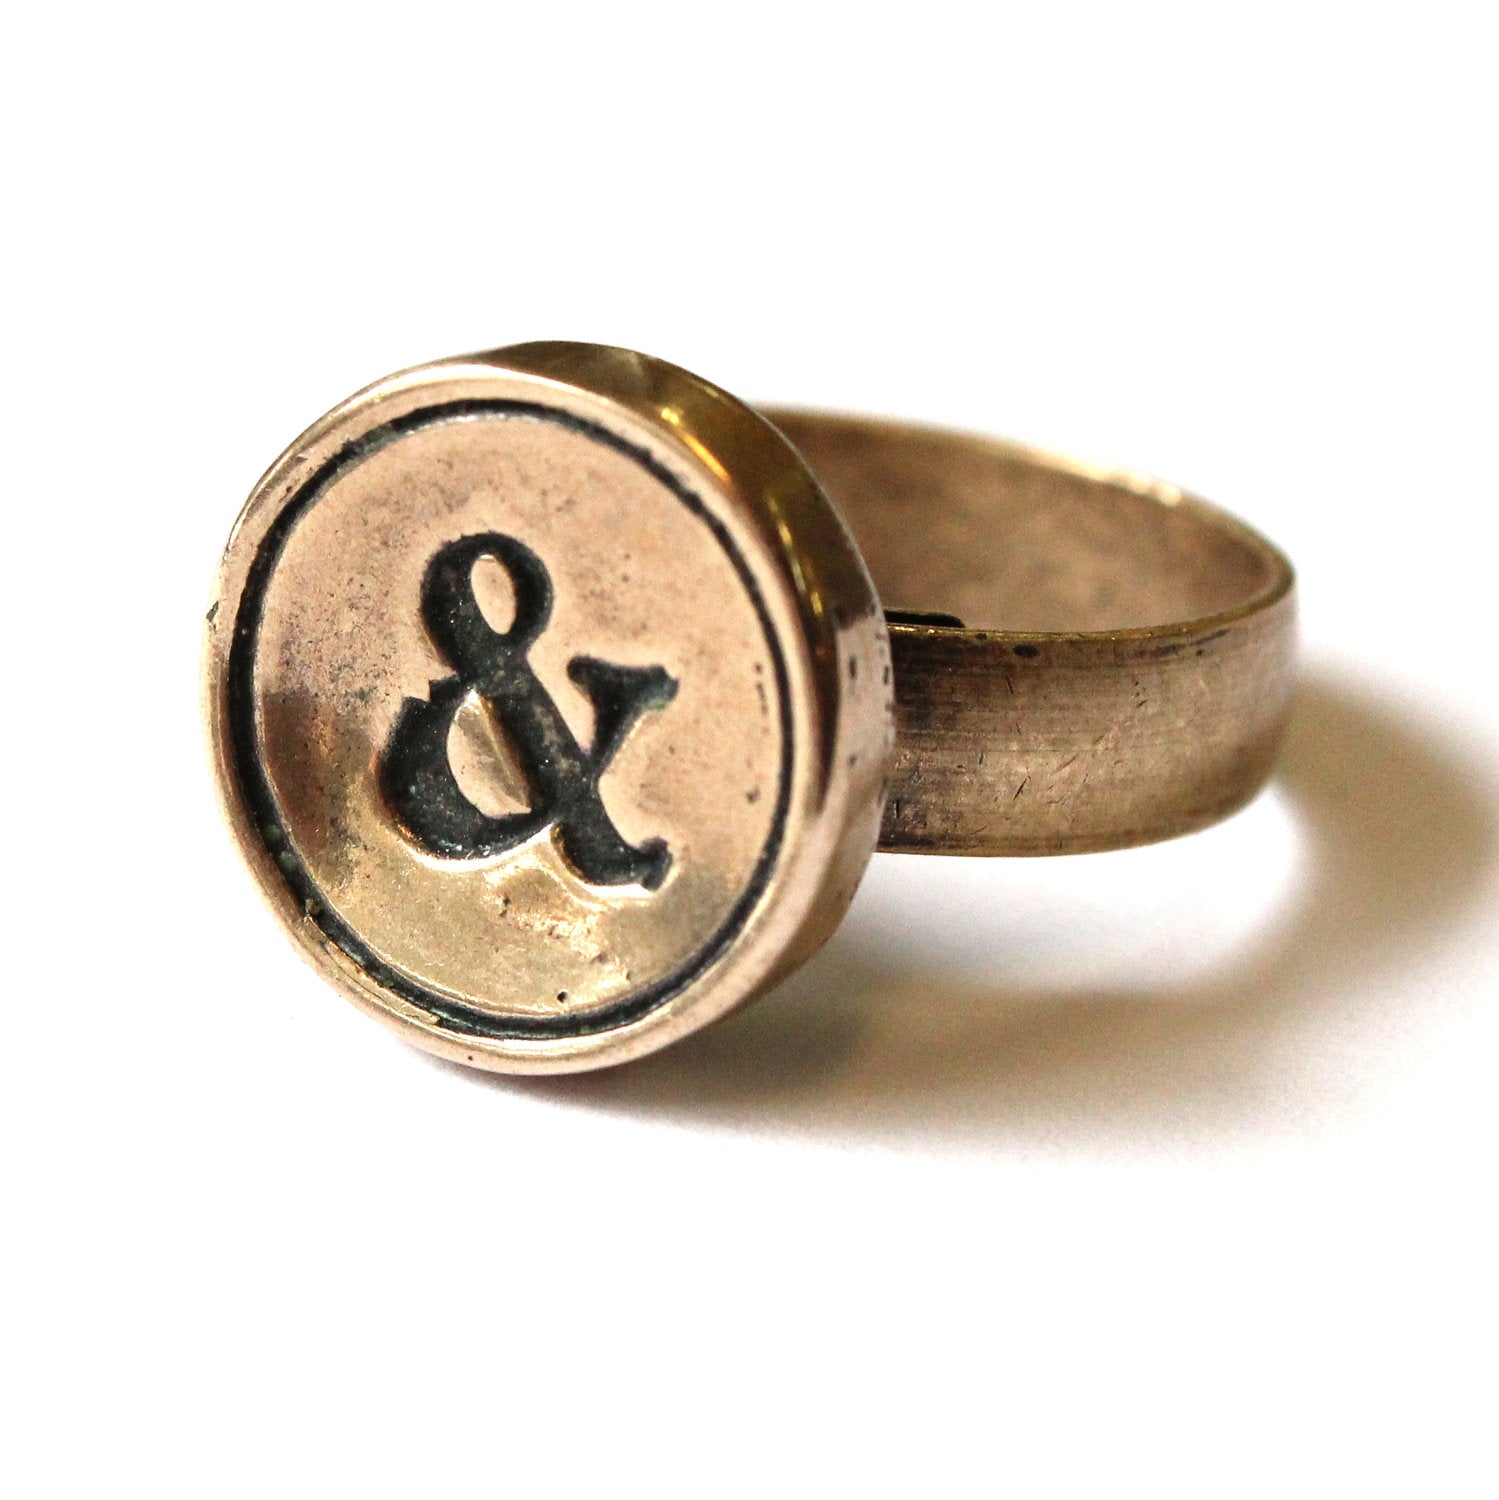 Simple Personalized Initial Ring - Gwen Delicious Jewelry Designs